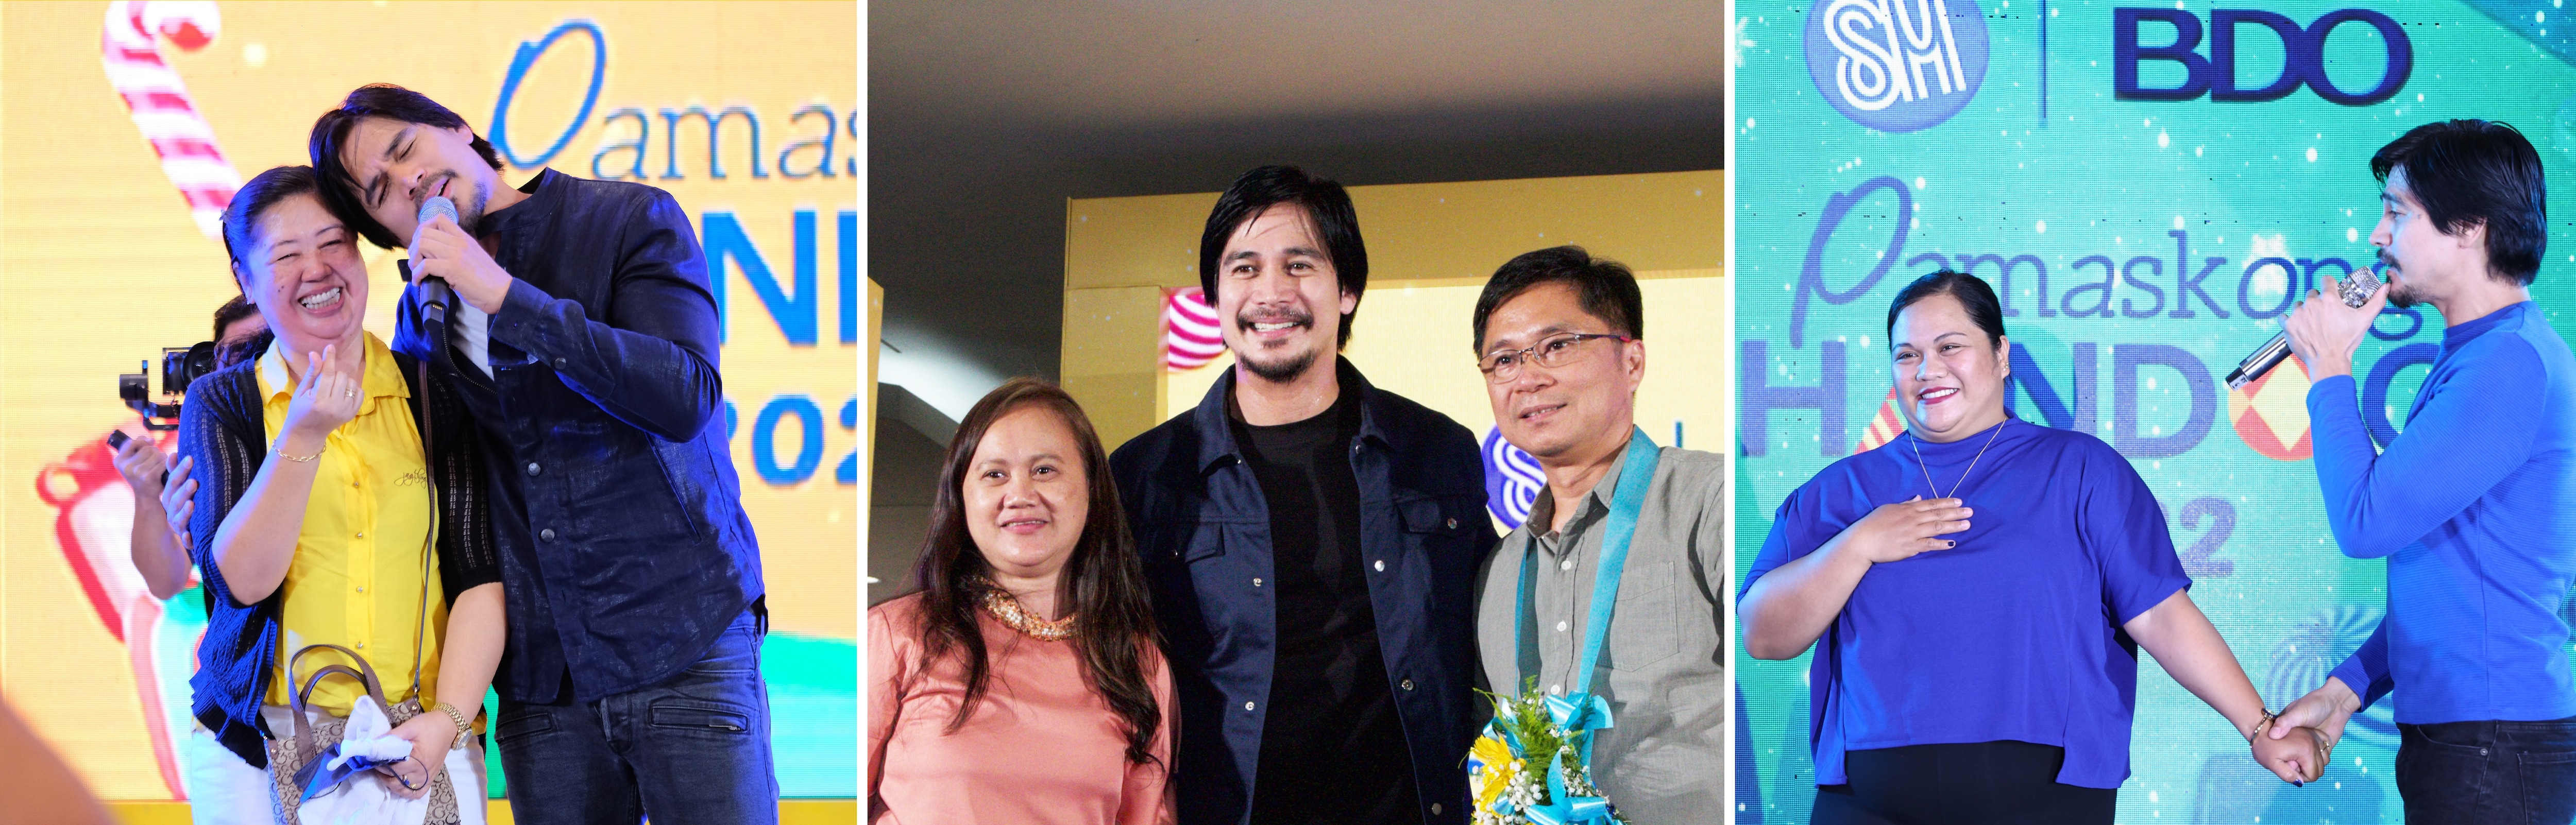 (Far left) Melanie Calumpong with Piolo Pascual and other recognized overseas Filipinos –Capt. Pierre Alfonso with his wife (middle photo) and Philline Bliss Dunque (3rd photo) Photo source: BDO at SM